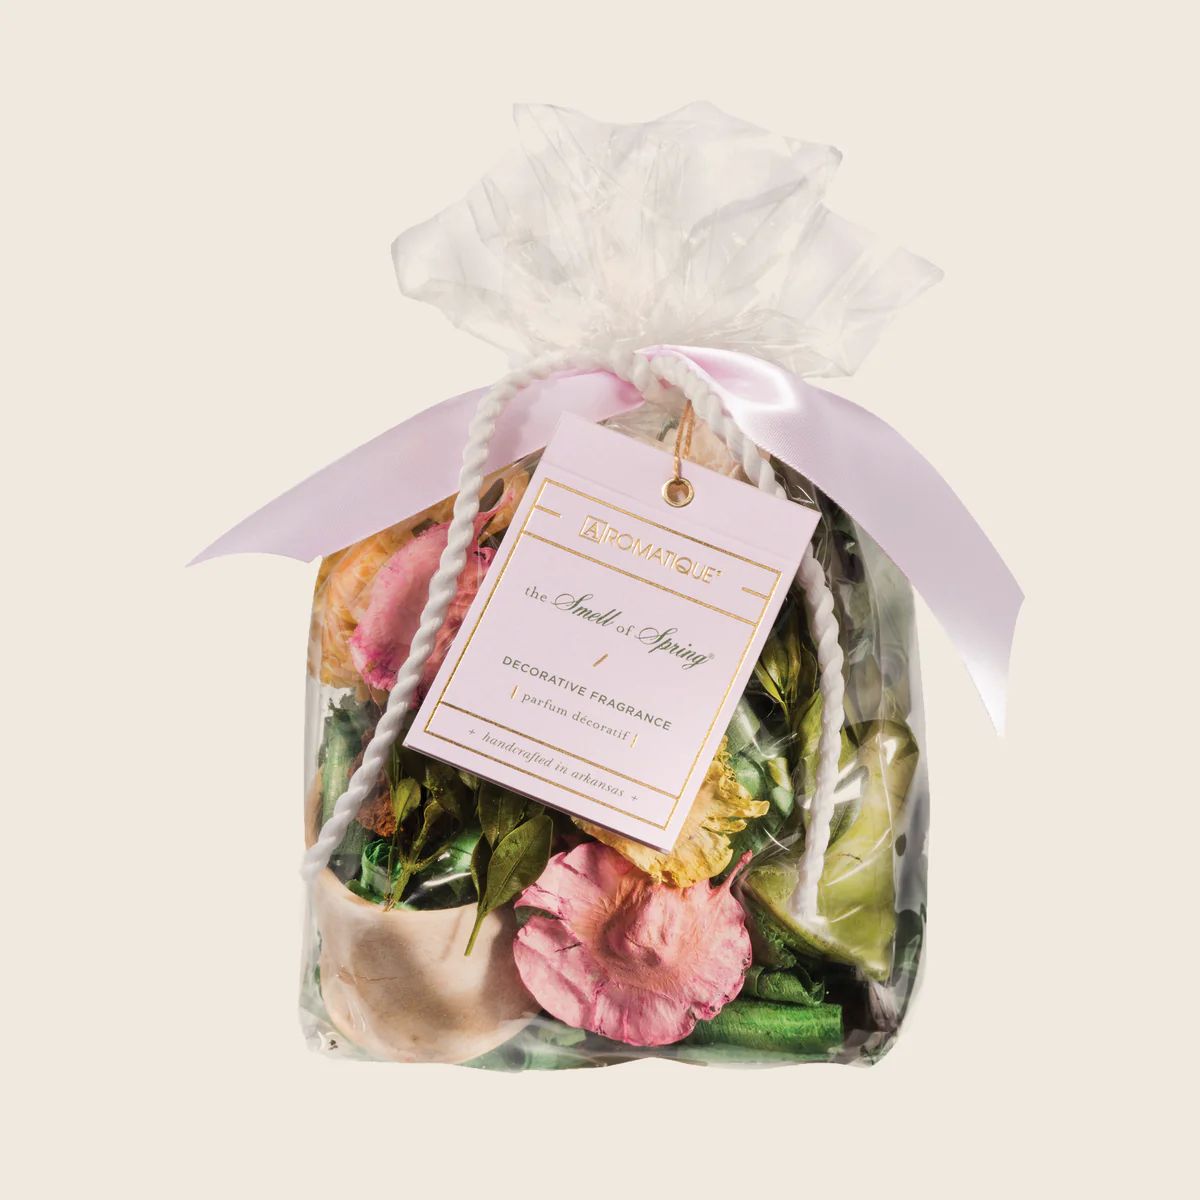 The Smell of Spring® - Standard Decorative Fragrance | Aromatique